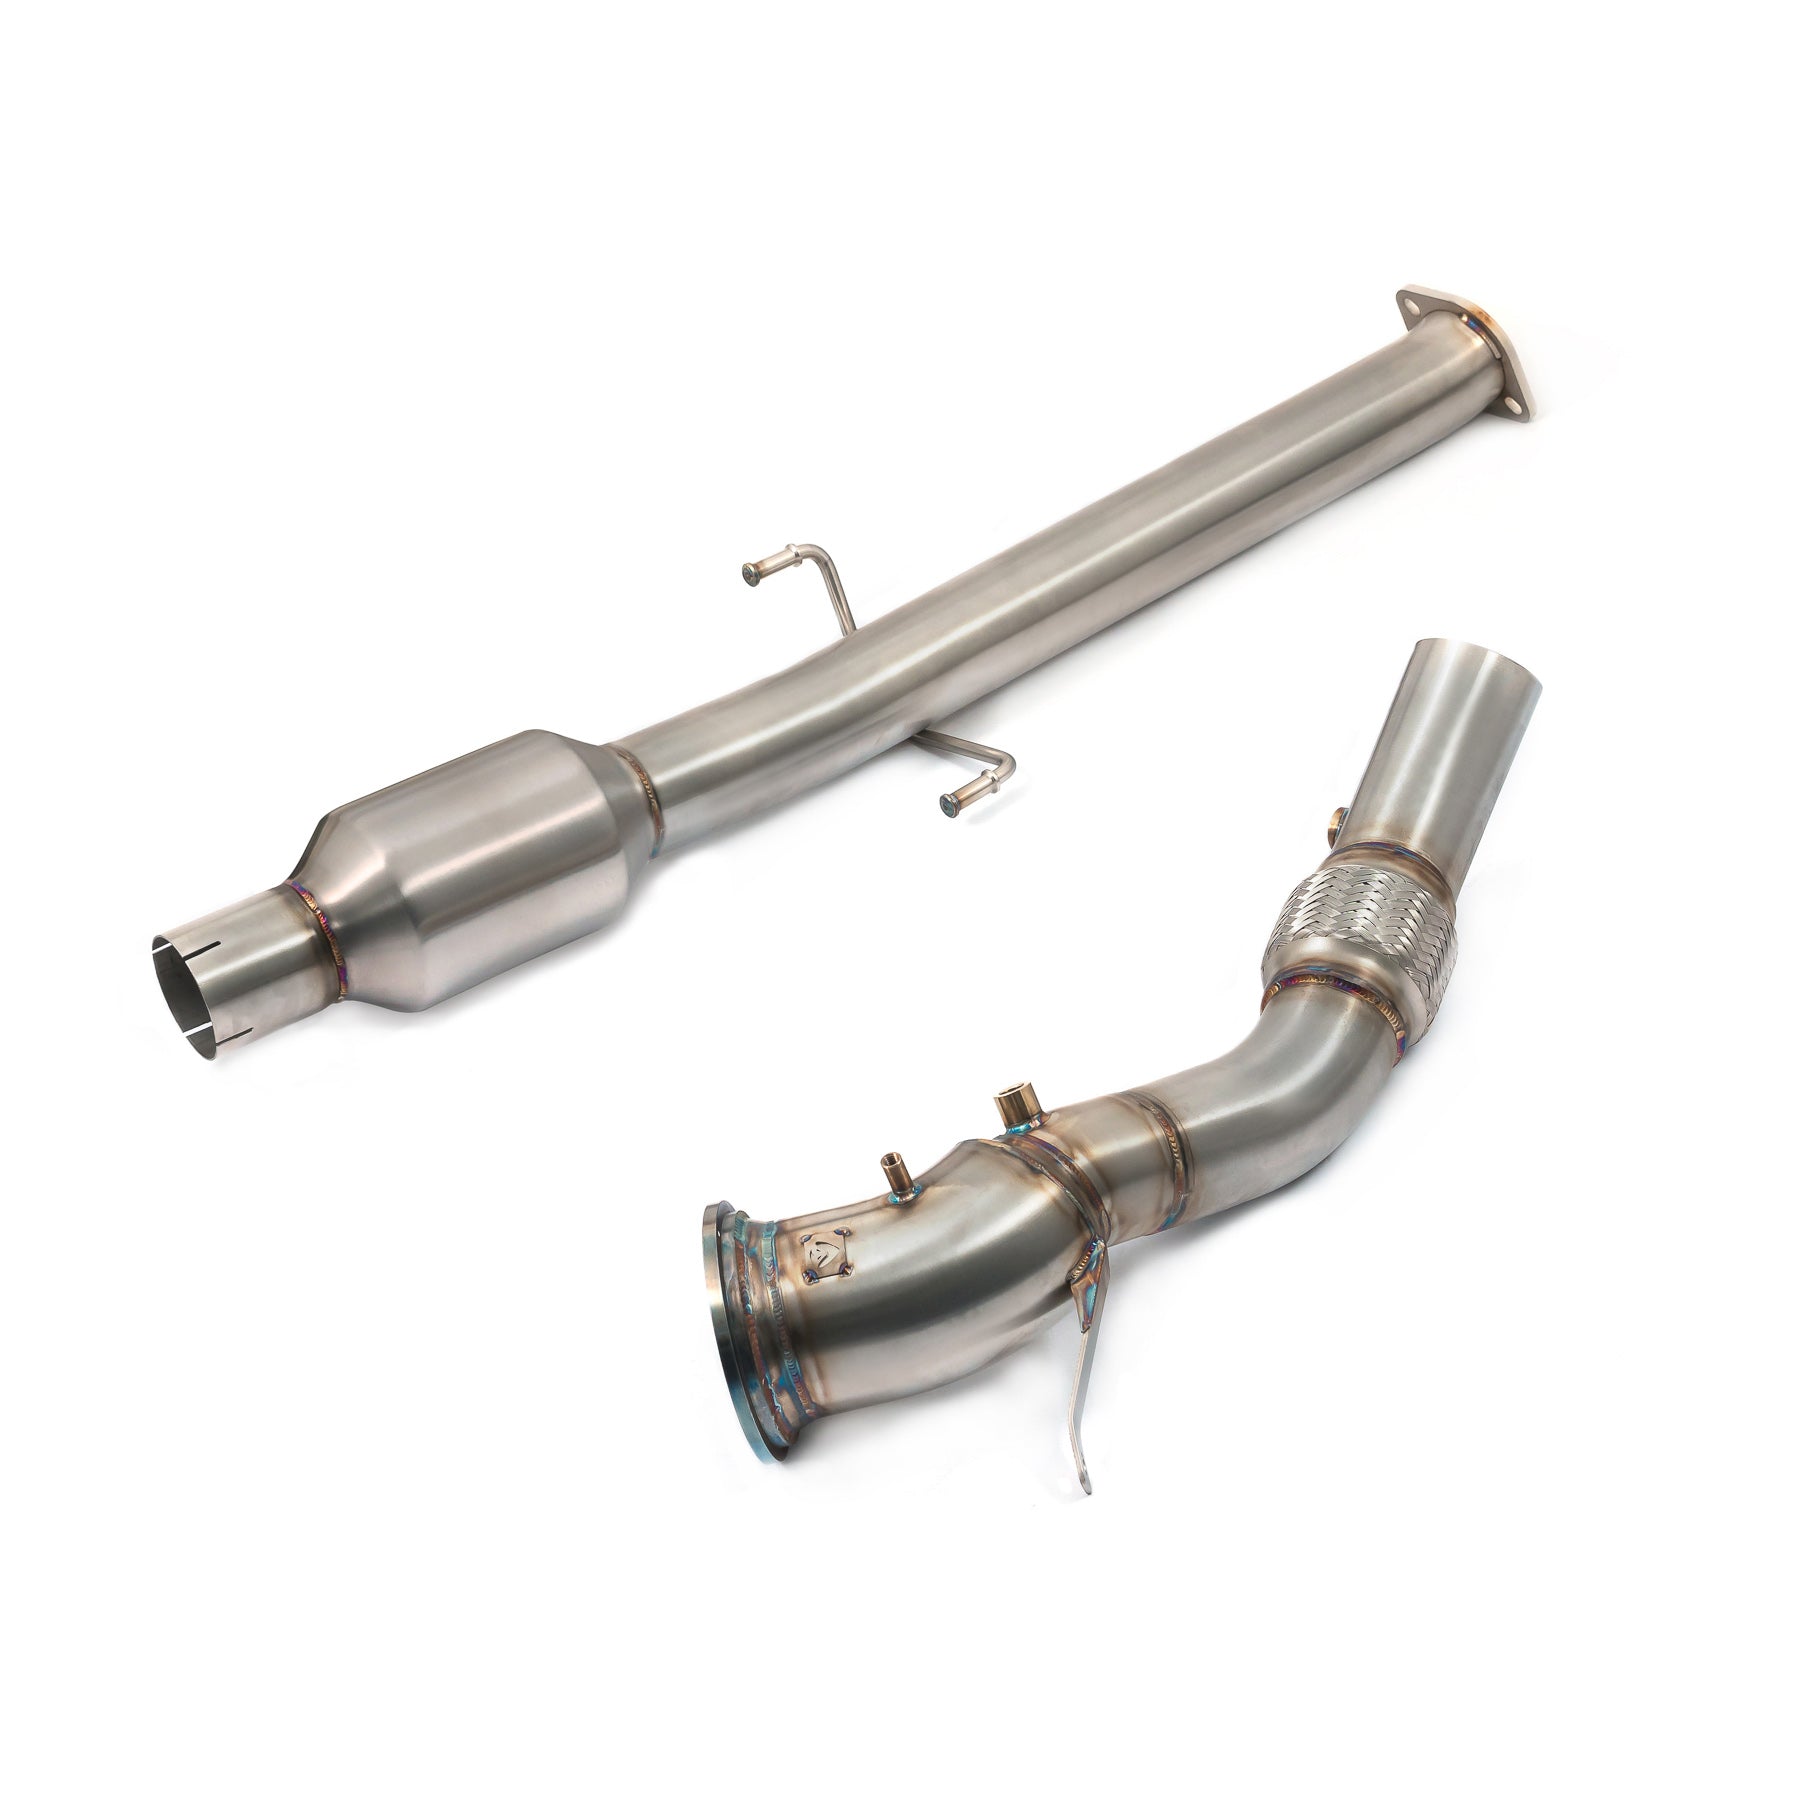 Toyota GR Yaris 1.6 Front Downpipe Sports Cat / De-Cat (incl GPF Delete) Performance Exhaust - Wayside Performance 